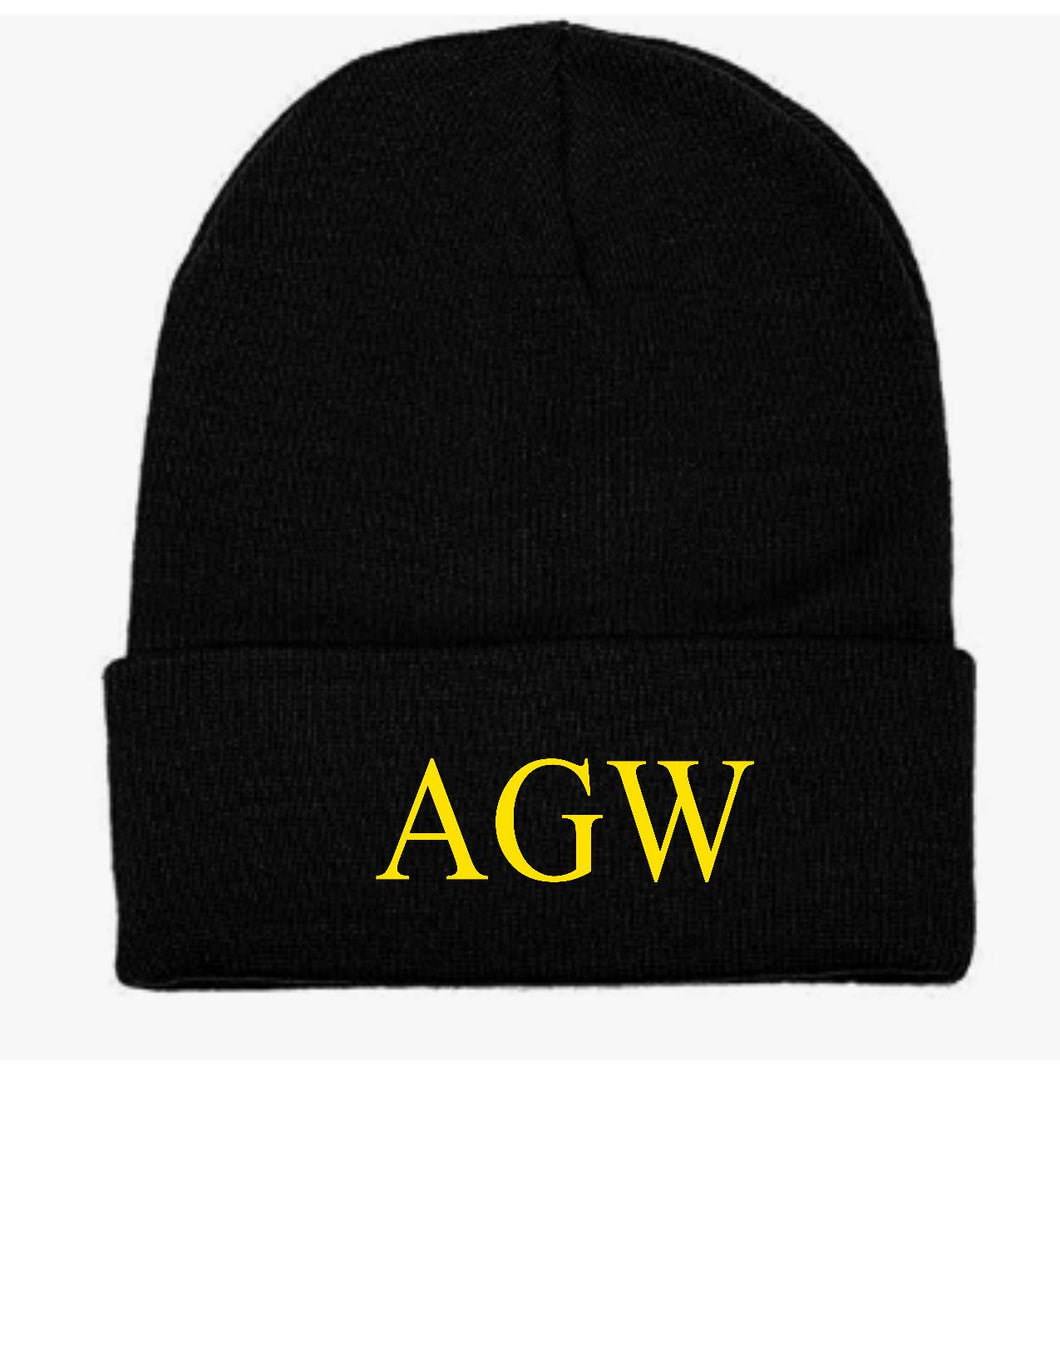 Black Beanie with AGW embroidered in yellow gold thread